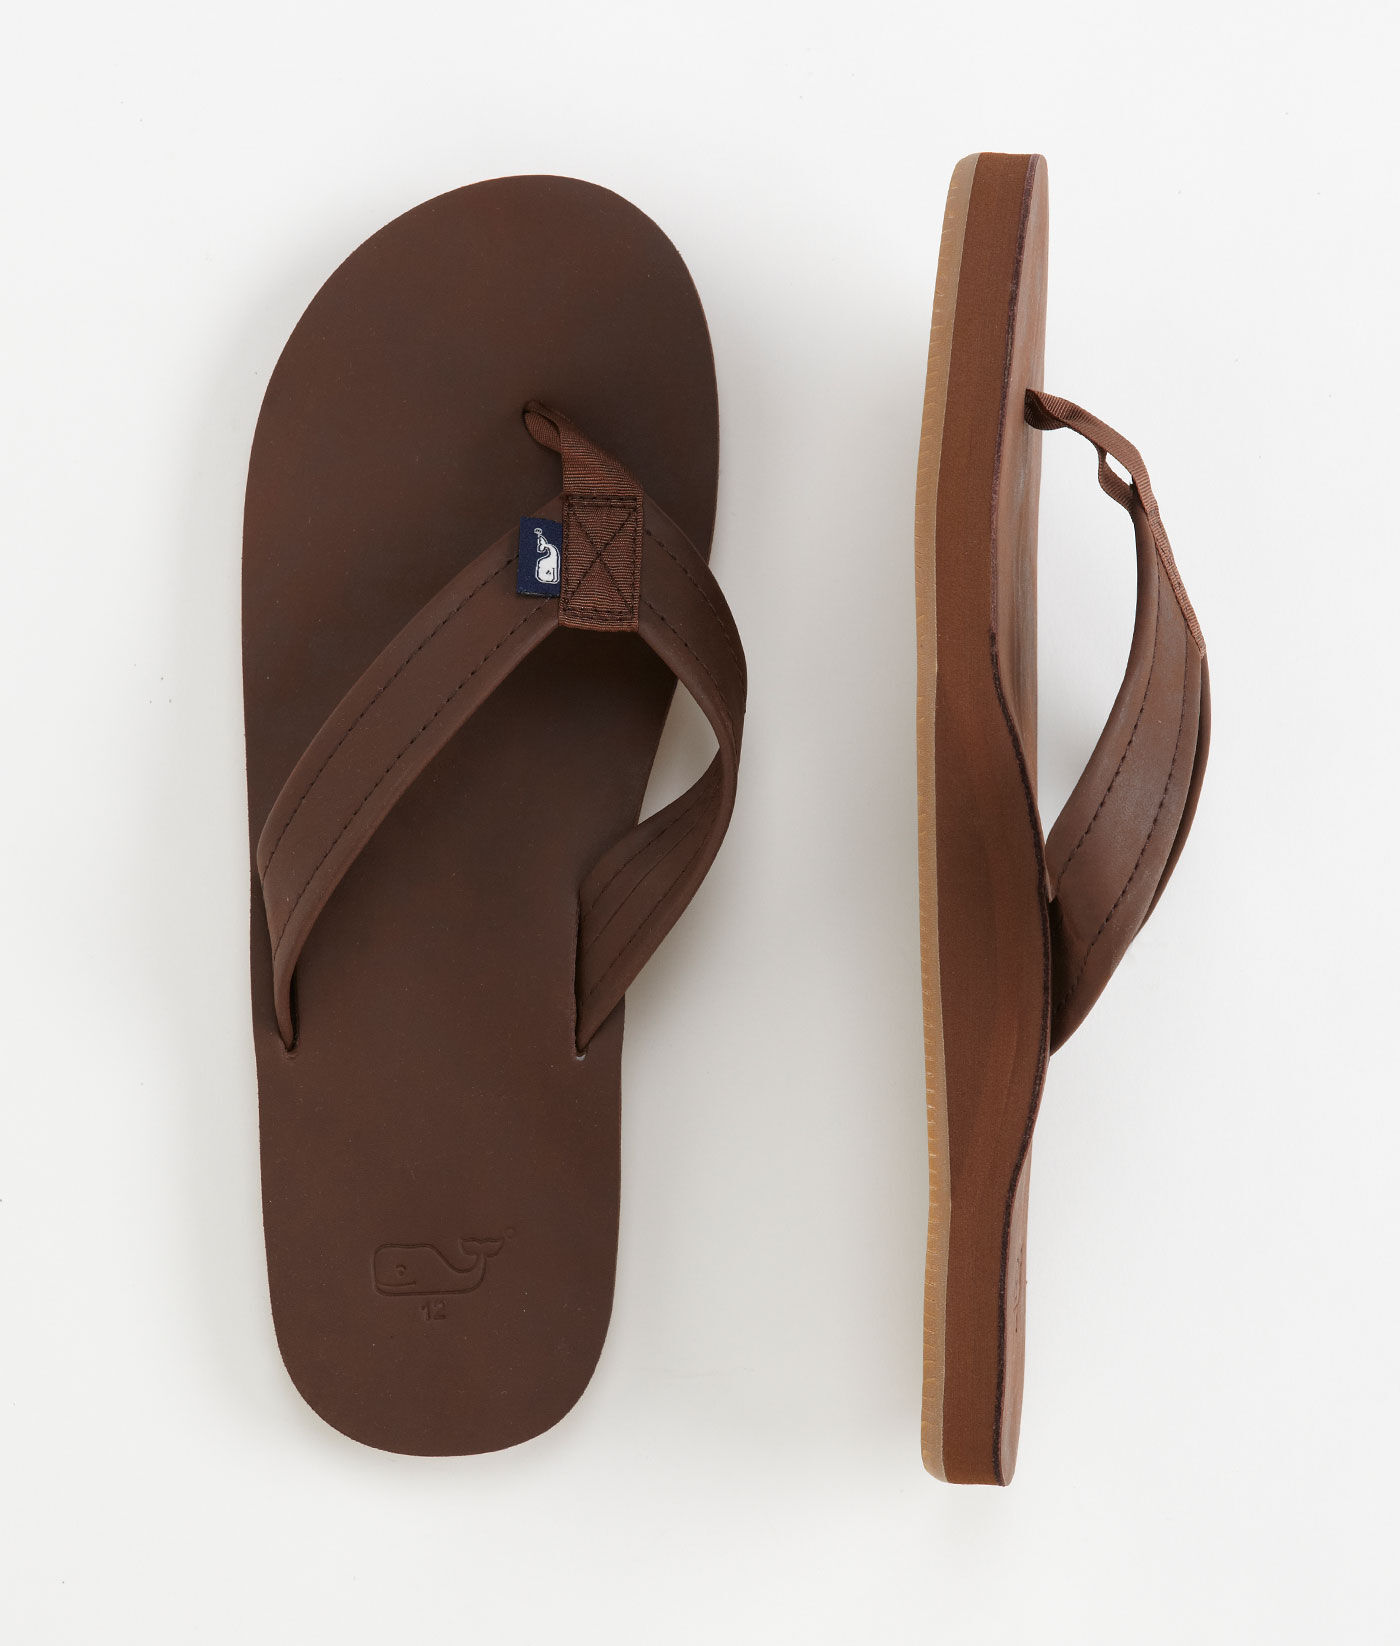 naot sandals removable footbed